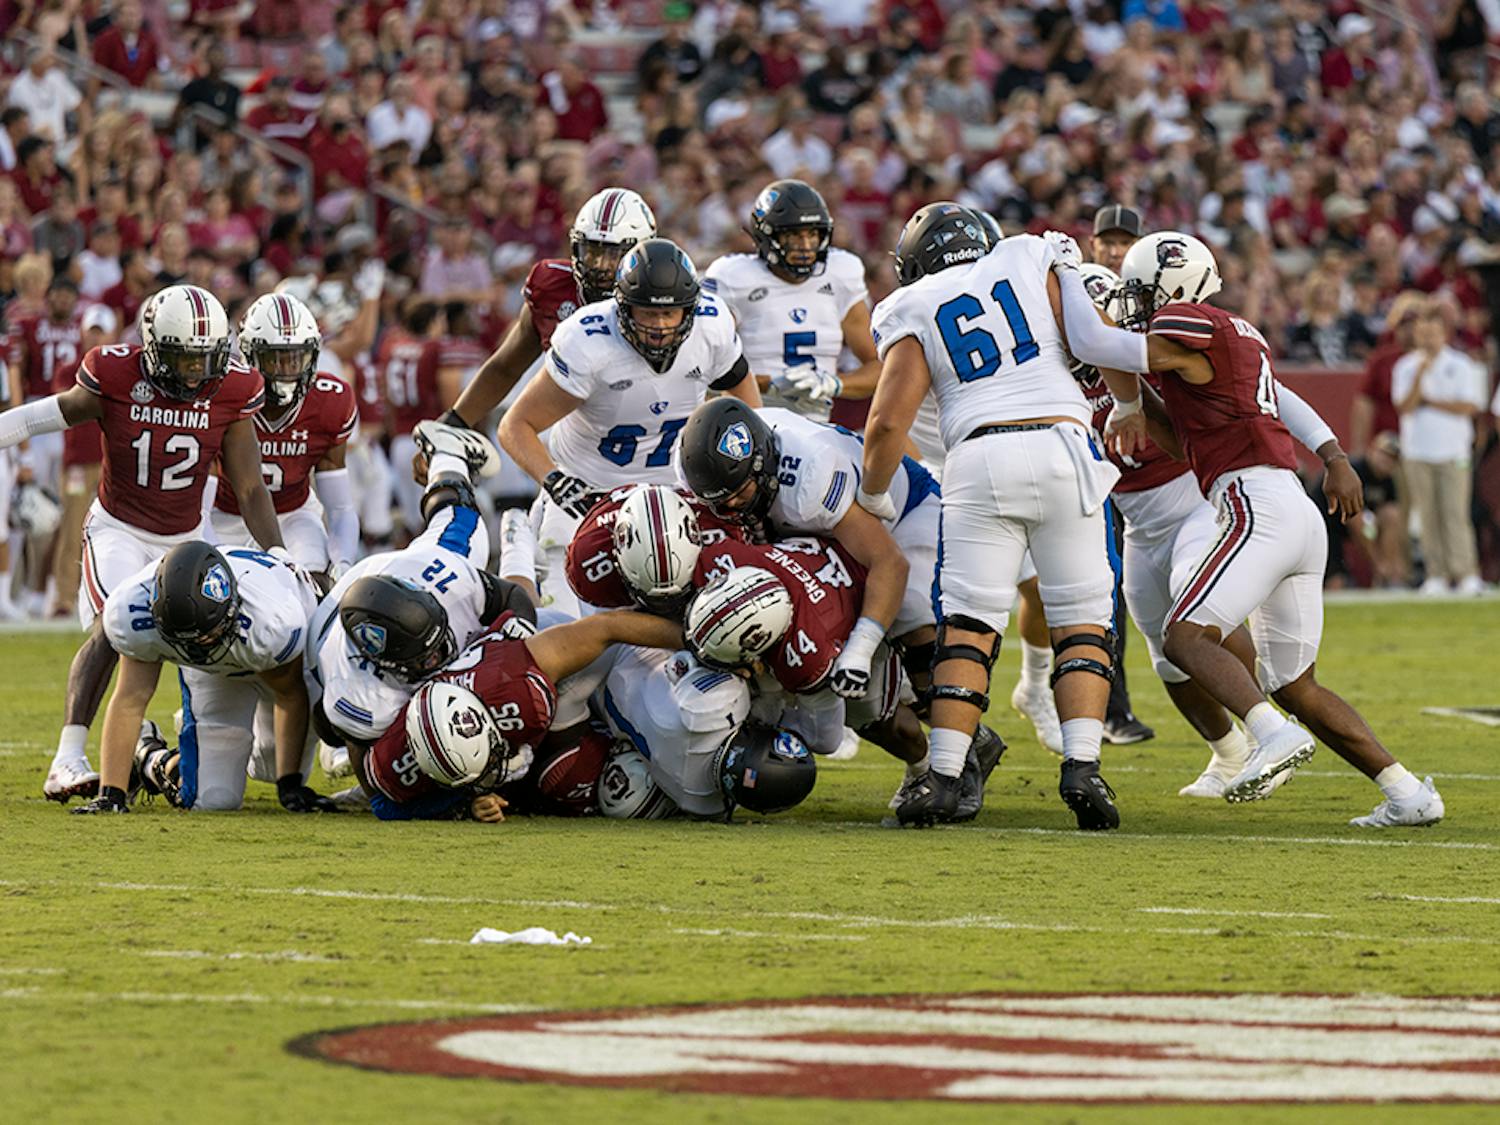 Gamecocks make a defense pile onto an Eastern Illinois player traveling down the field.